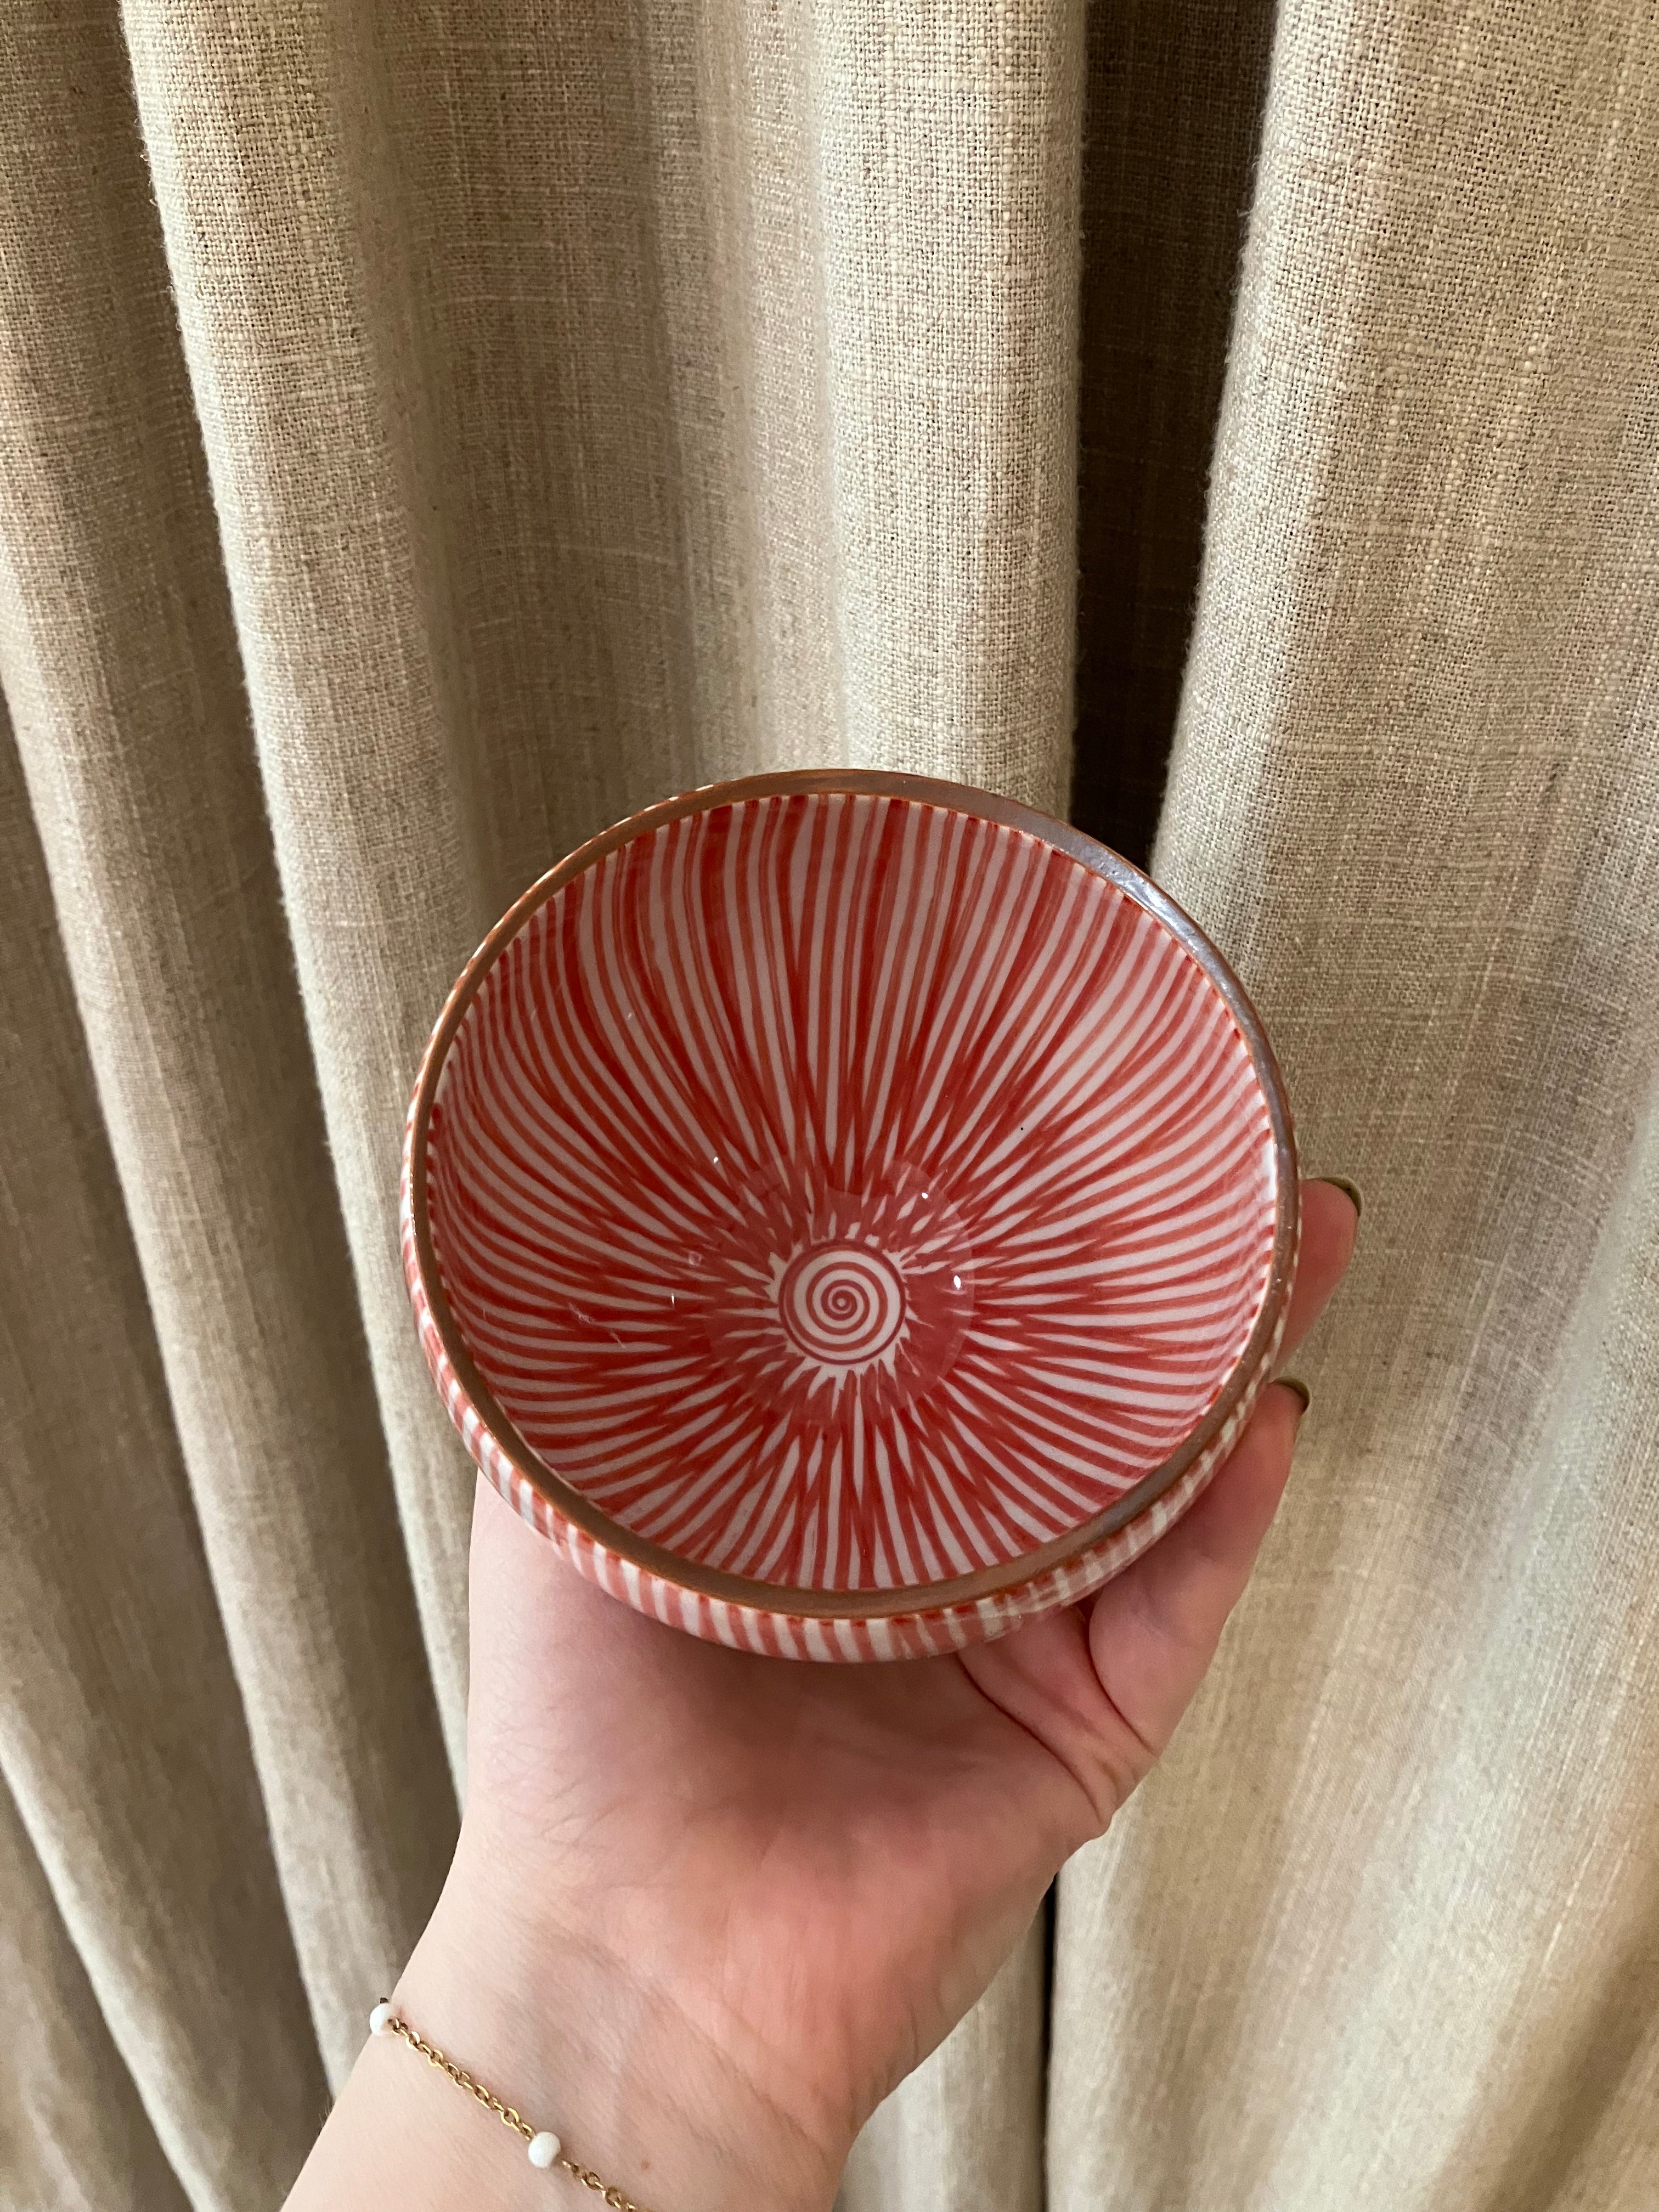 Cup with red vertical stripes and brown rim